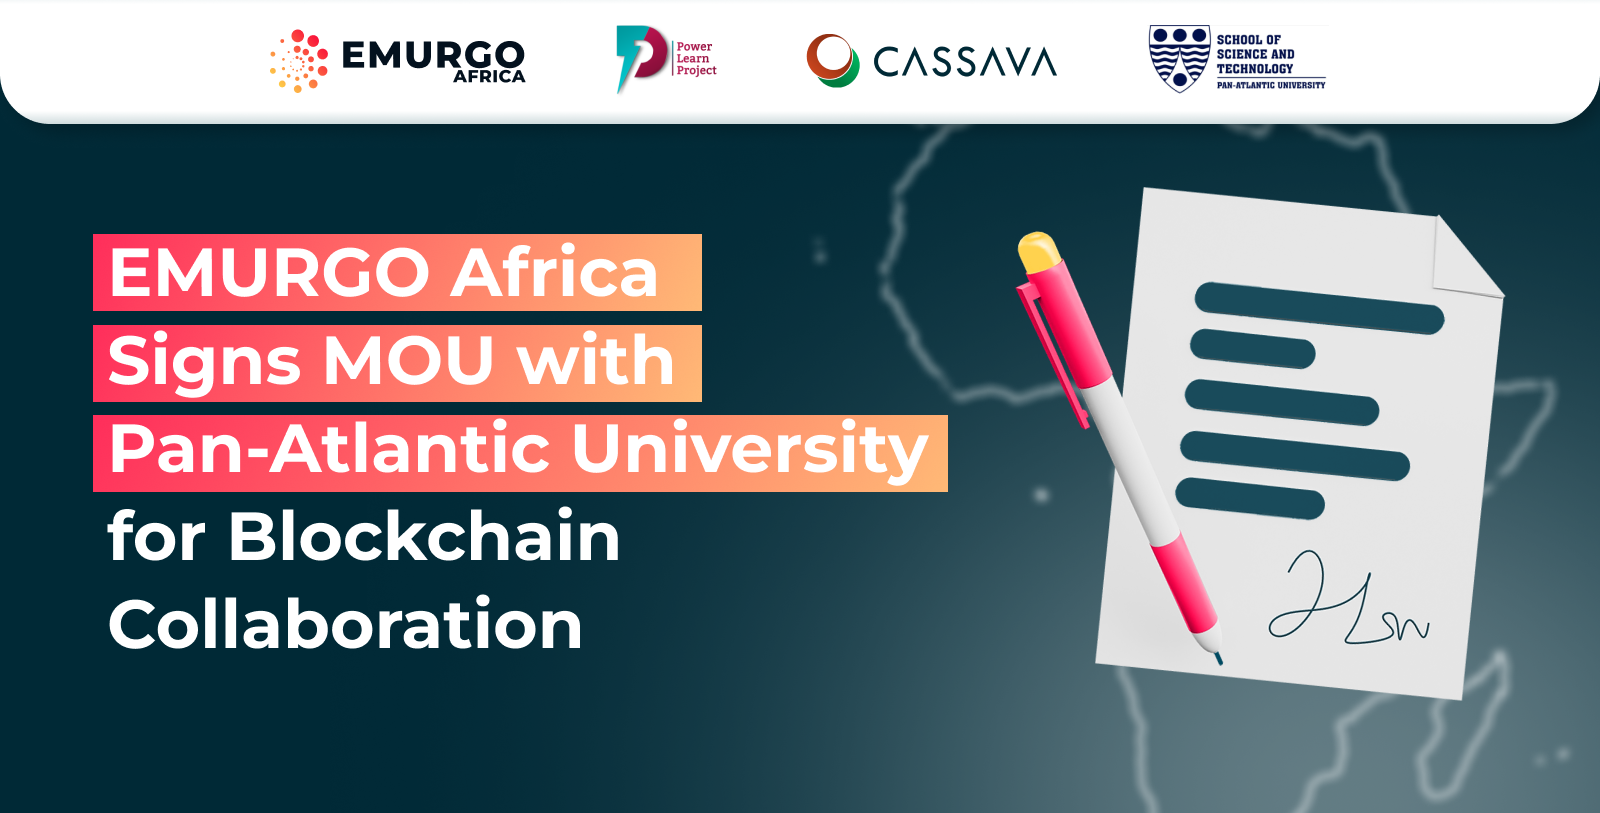 EMURGO Africa Signs MOU with Pan-Atlantic University for Blockchain Collaboration